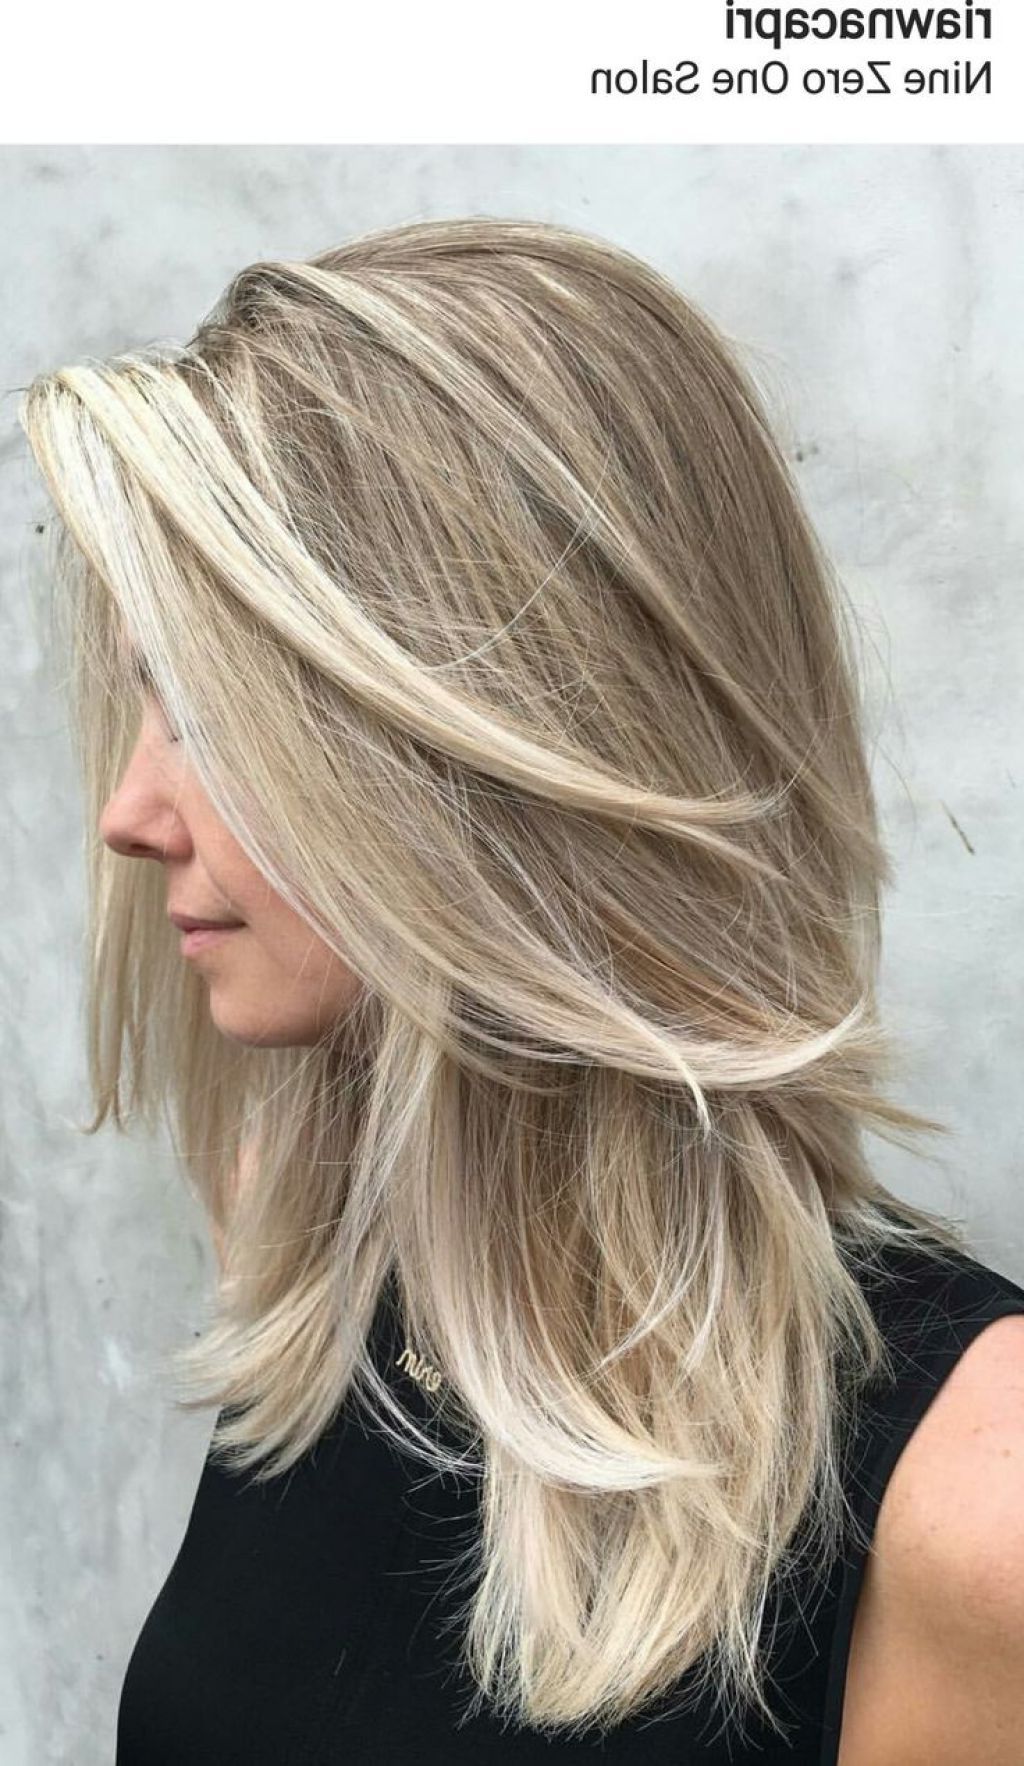 Trendy Shoulder Length Hairstyles With Long Swoopy Layers Inside Medium Hairstyle : Layered Hairstyles For Medium Length Hair With (View 4 of 20)